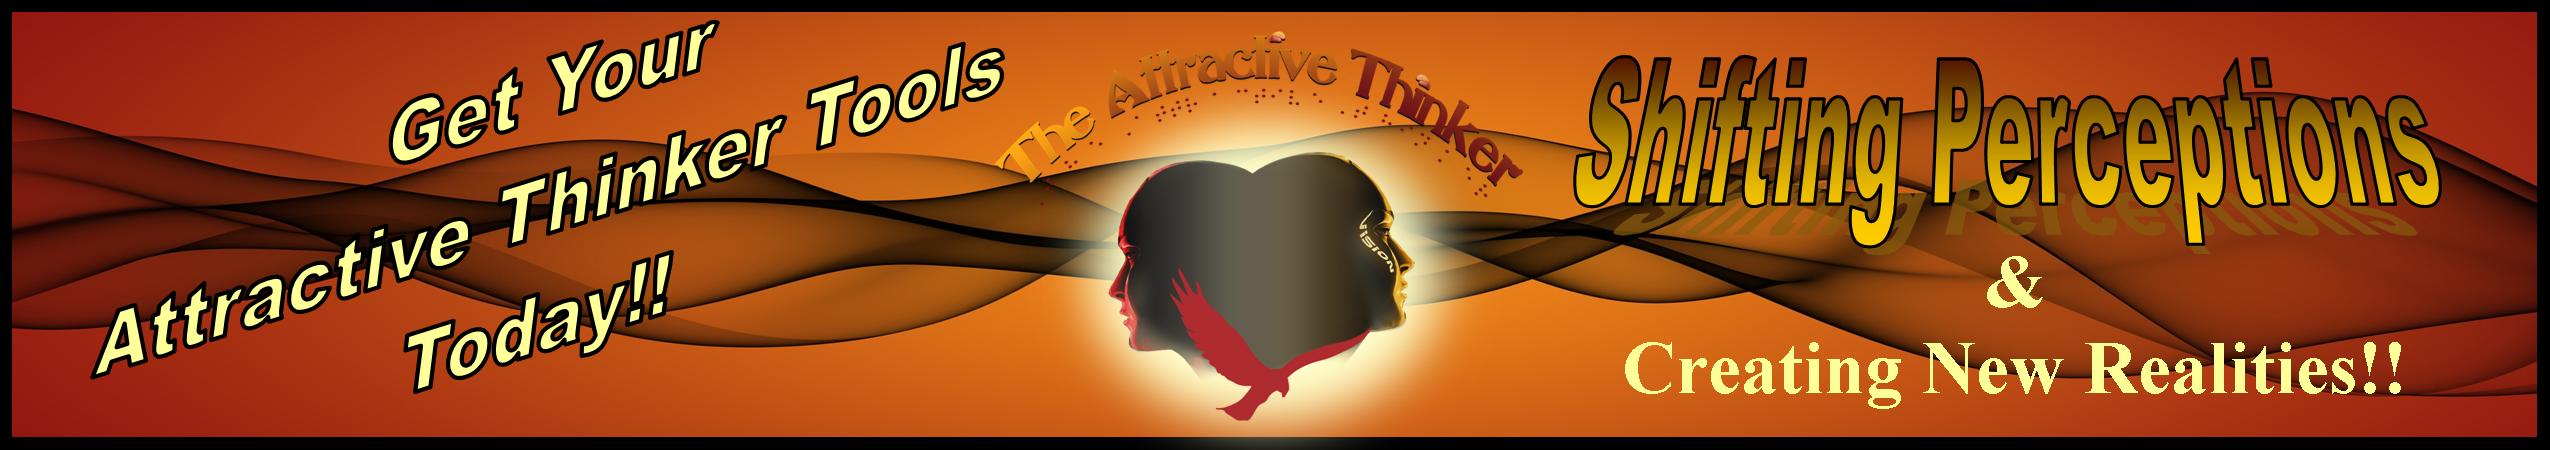 The Attractive Thinker Downloadable Audios Banner